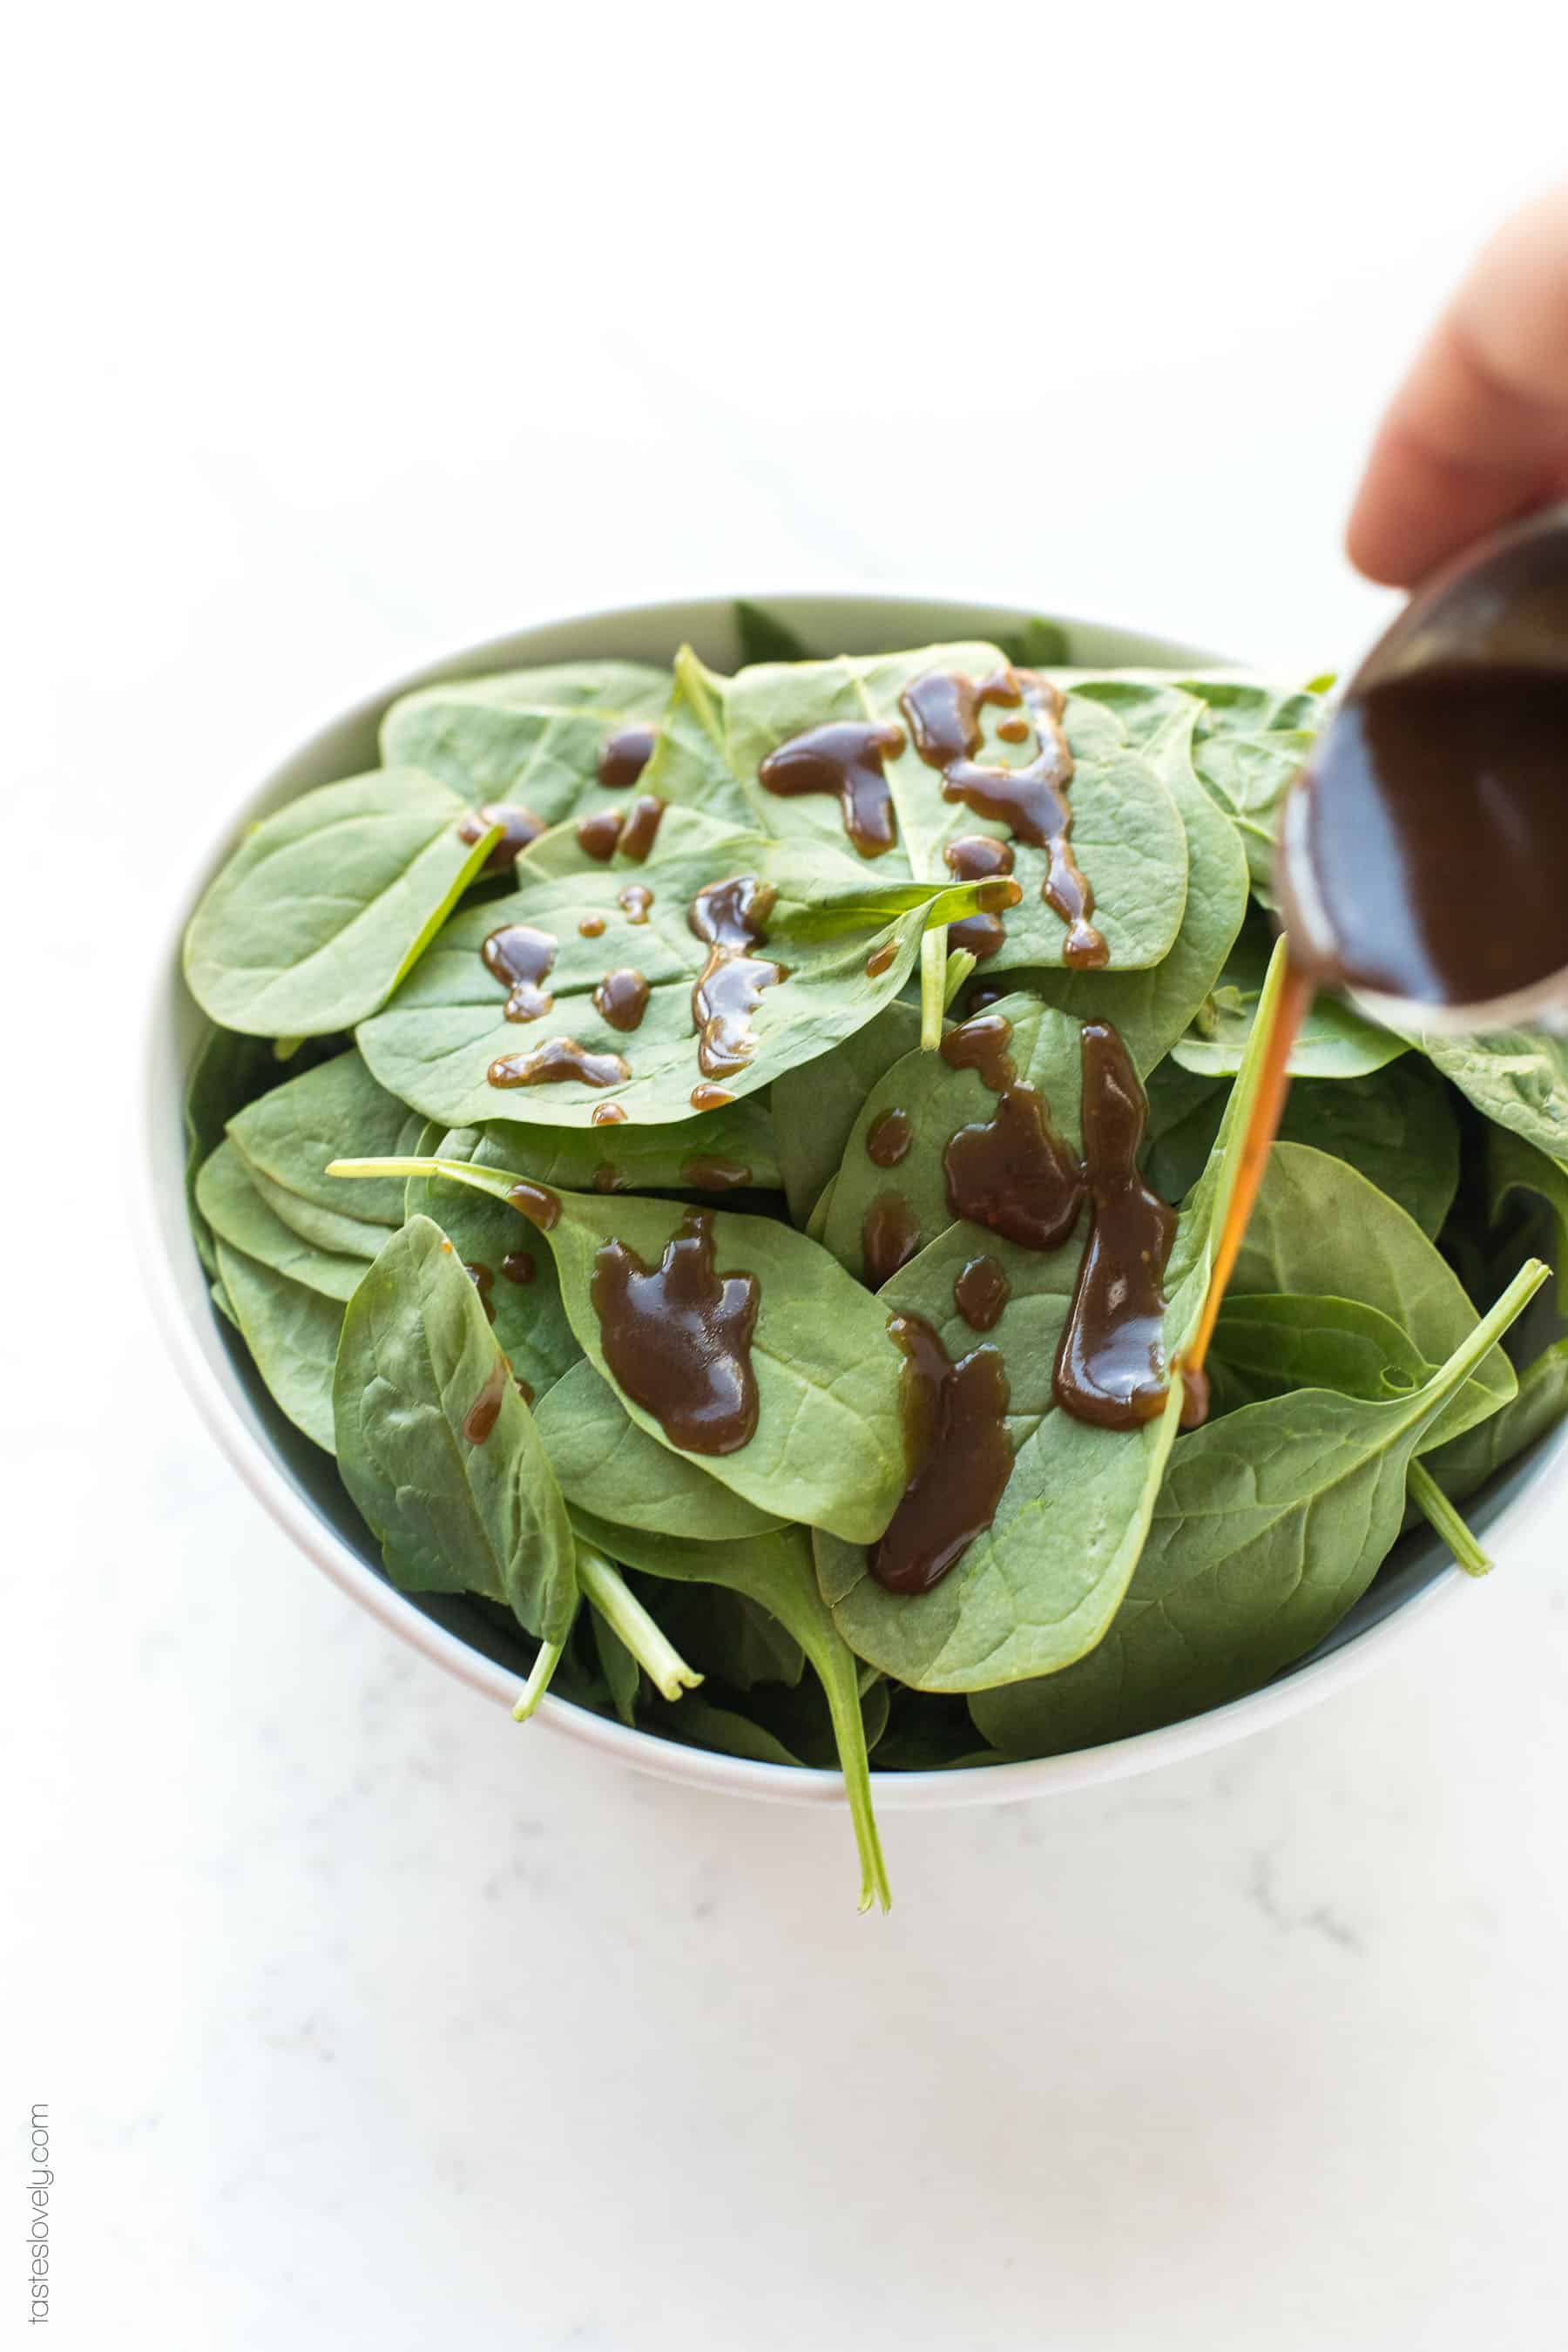 drizzling balsamic vinaigrette salad dressing on spinach leaves